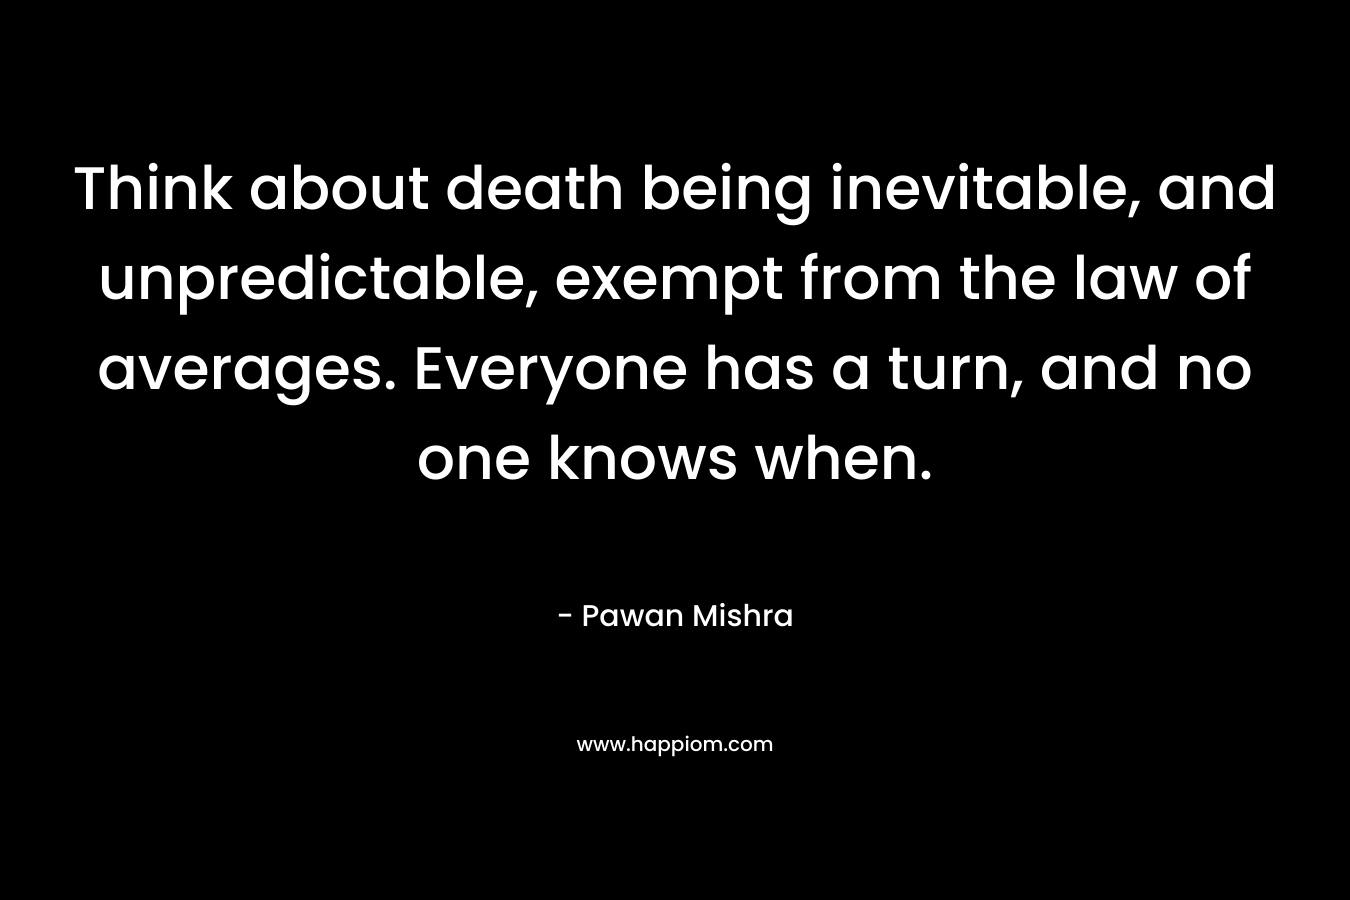 Think about death being inevitable, and unpredictable, exempt from the law of averages. Everyone has a turn, and no one knows when. – Pawan Mishra